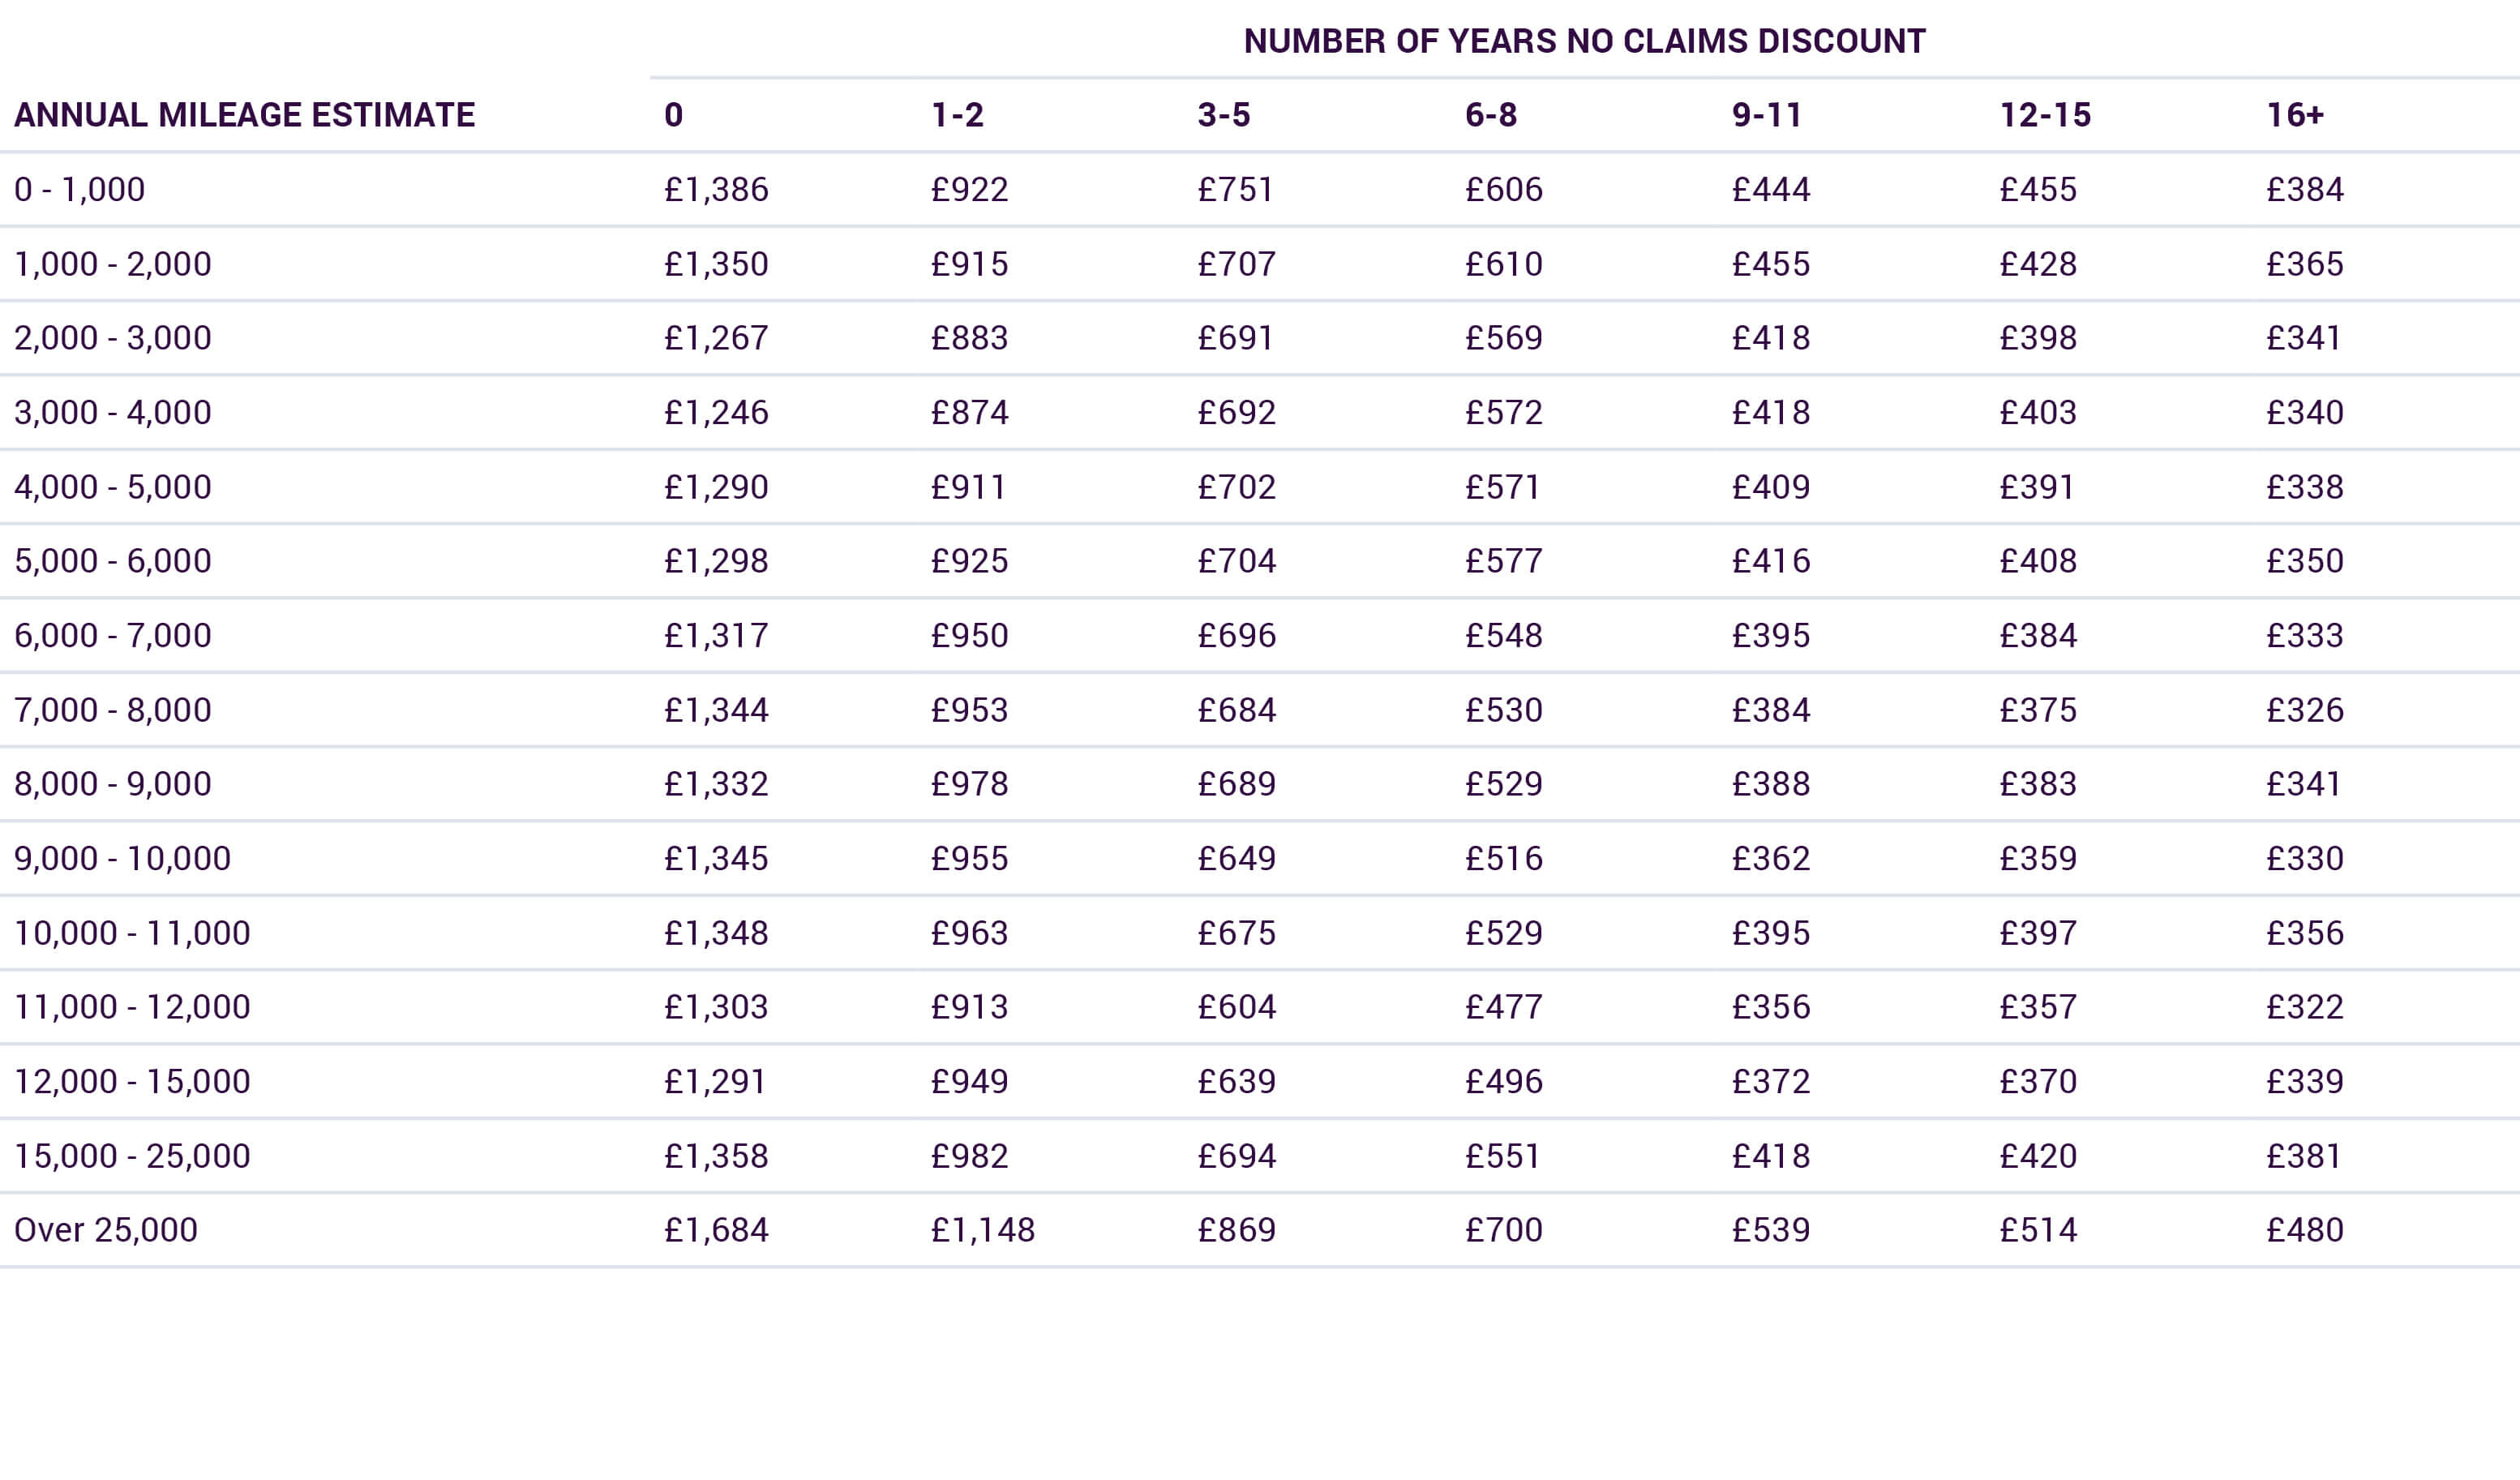 Table of Average Cheapest Quote by Mileage vs Year of No Claims Discount